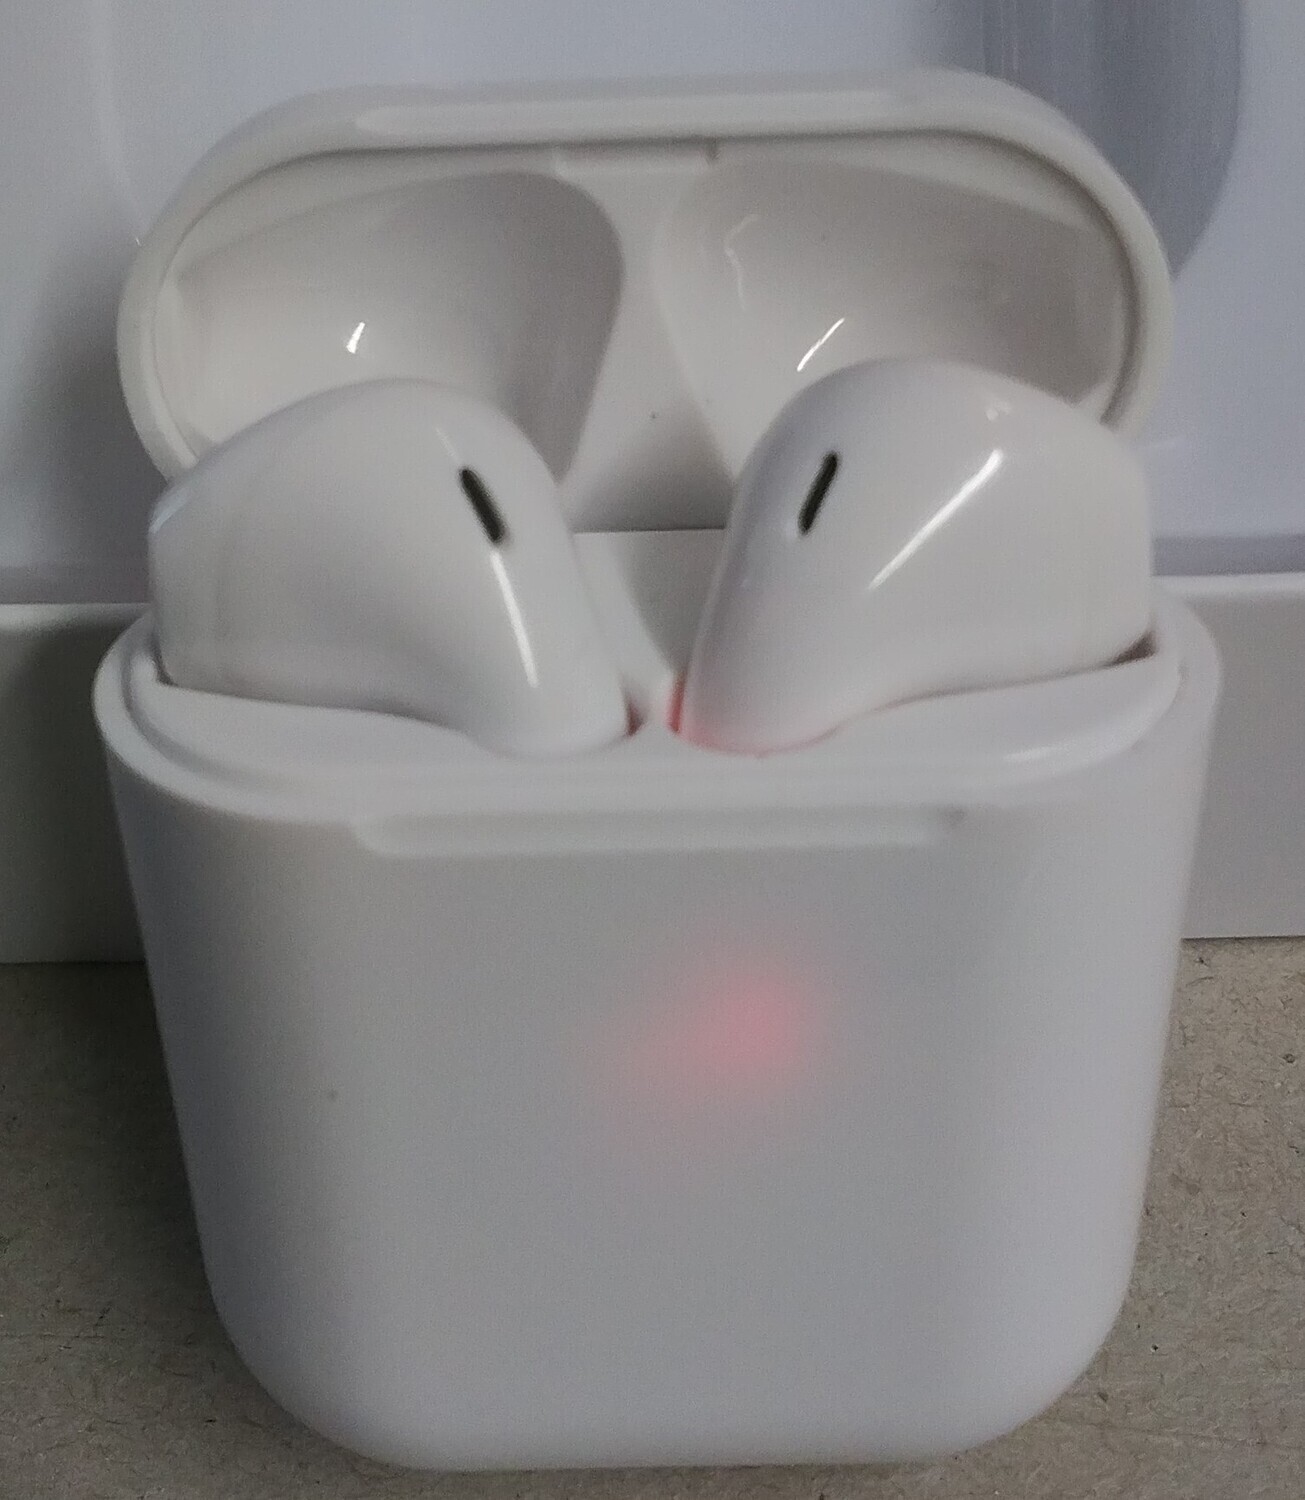 5.0 White Auto Connect Wireless Earbuds